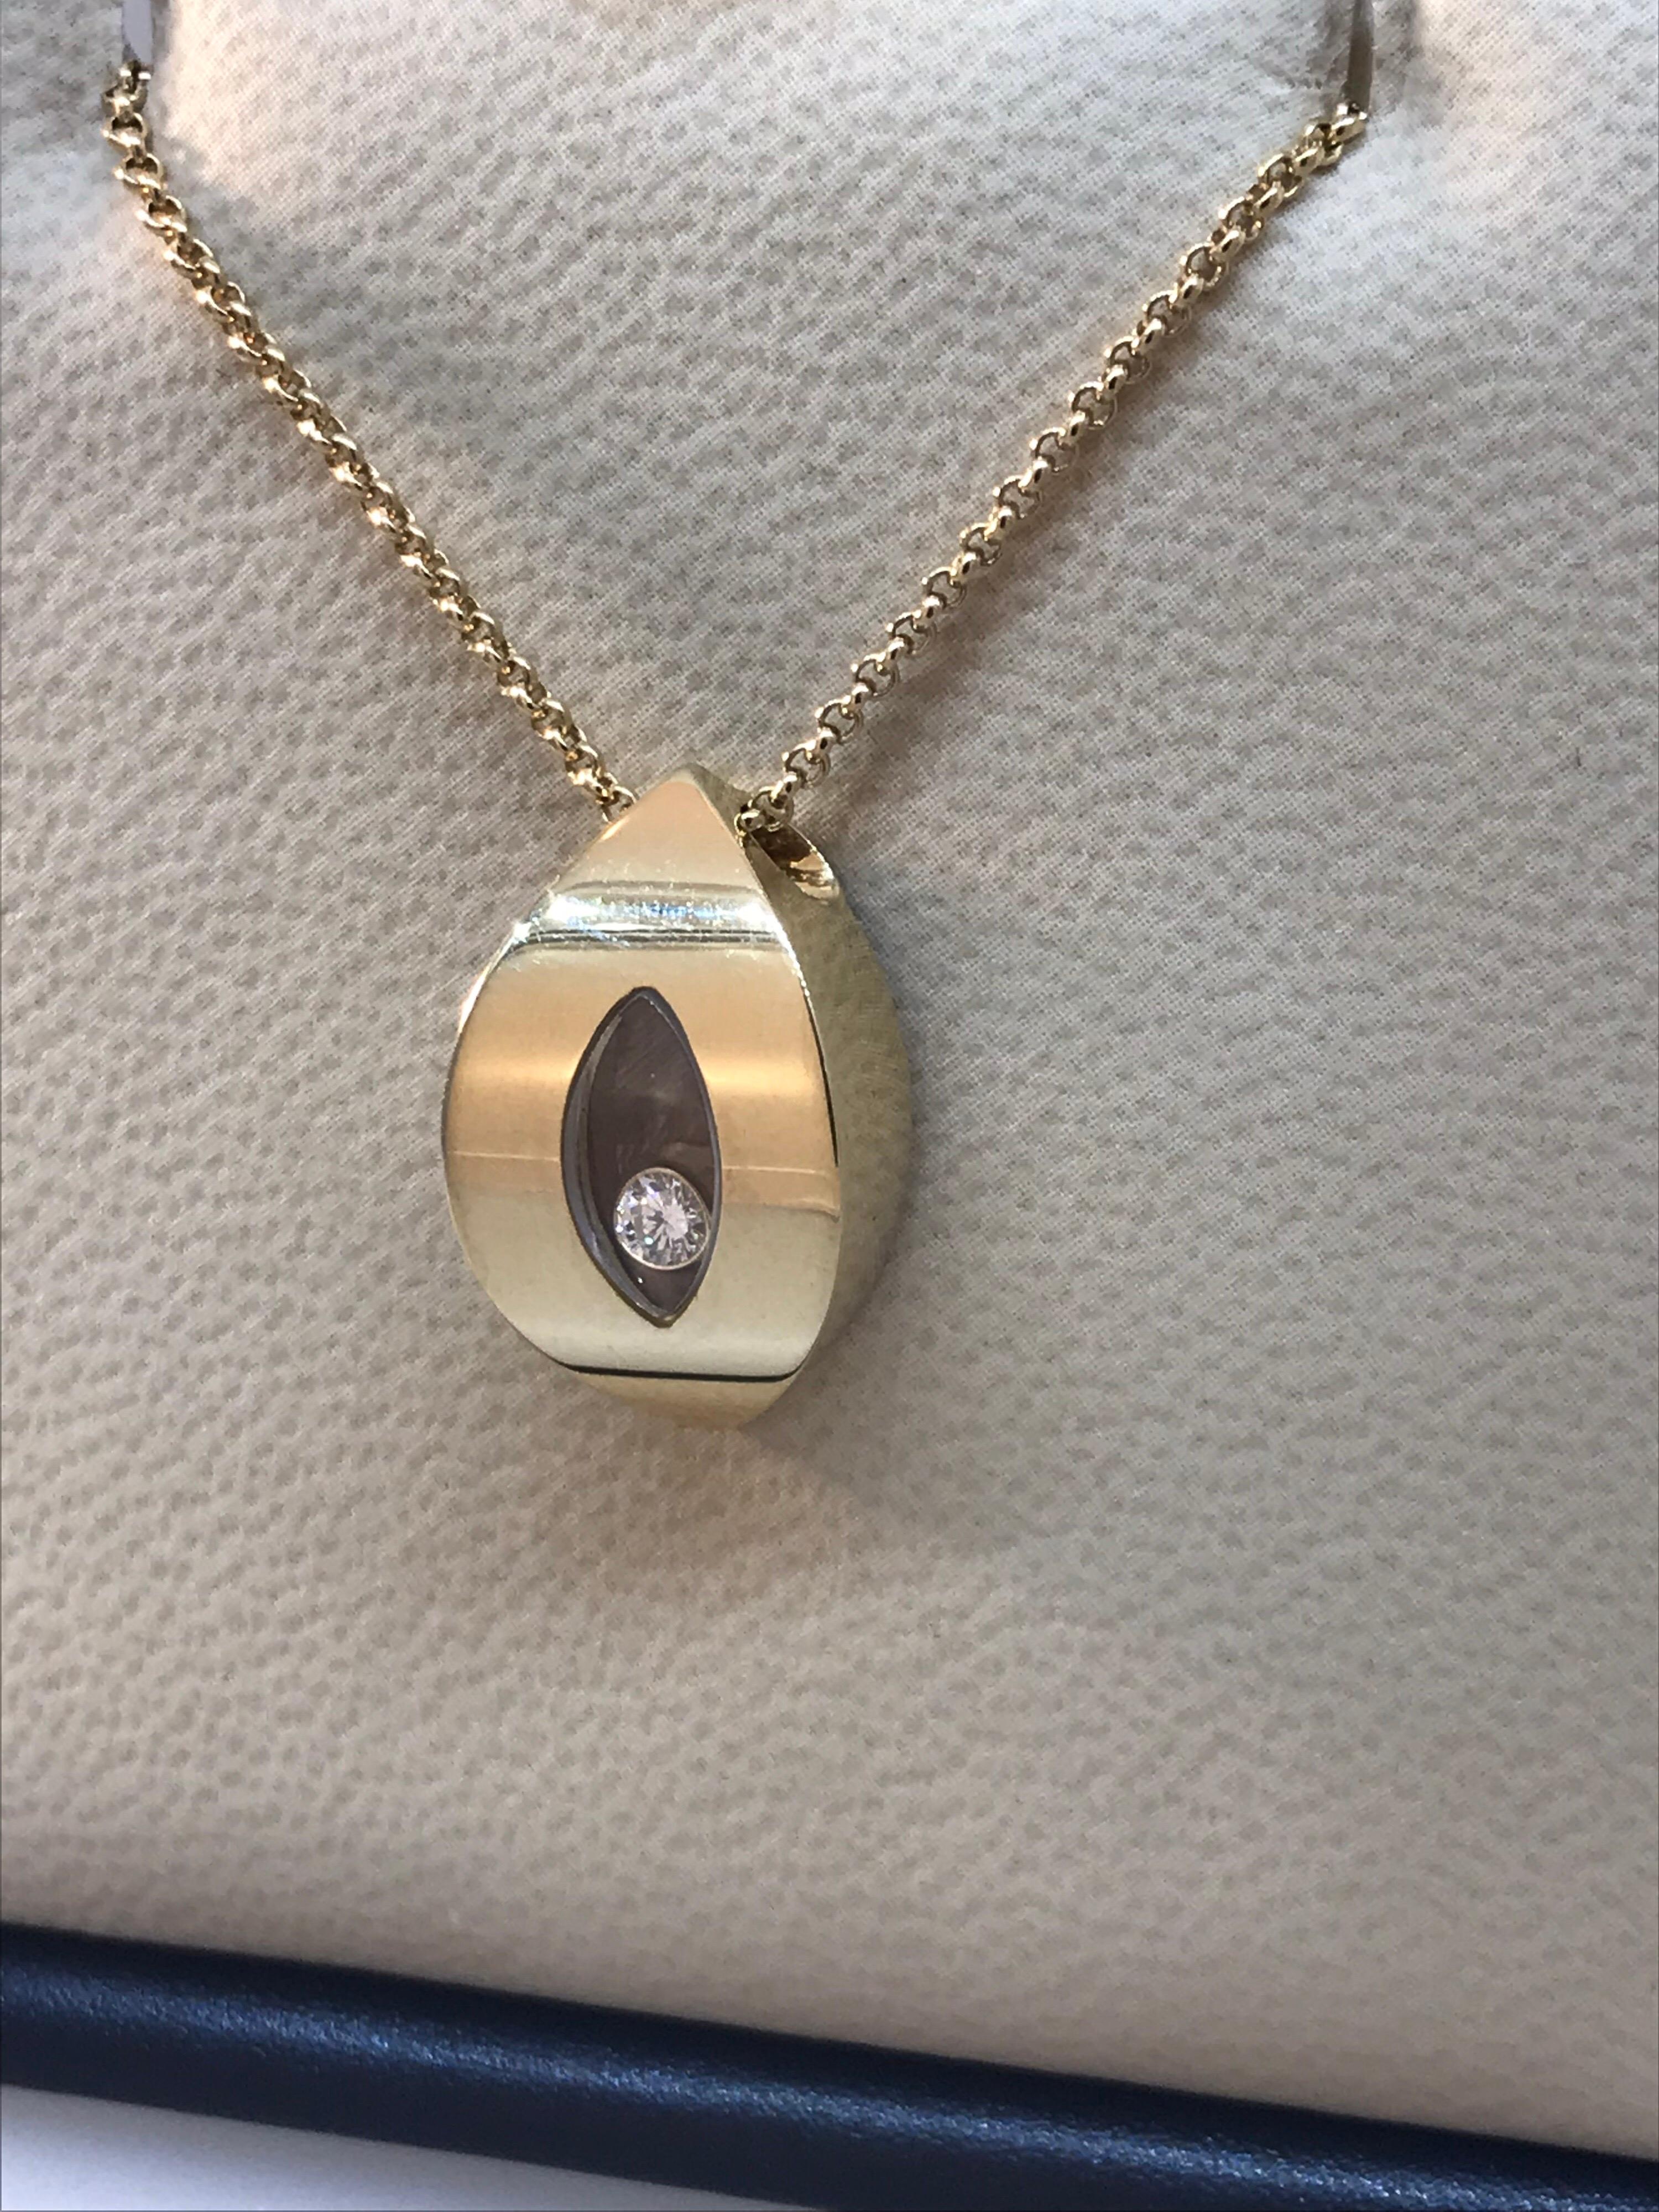 Chopard Happy Diamonds 18 Karat Yellow Gold Teardrop Shaped Pendant/Necklace New In Excellent Condition For Sale In New York, NY